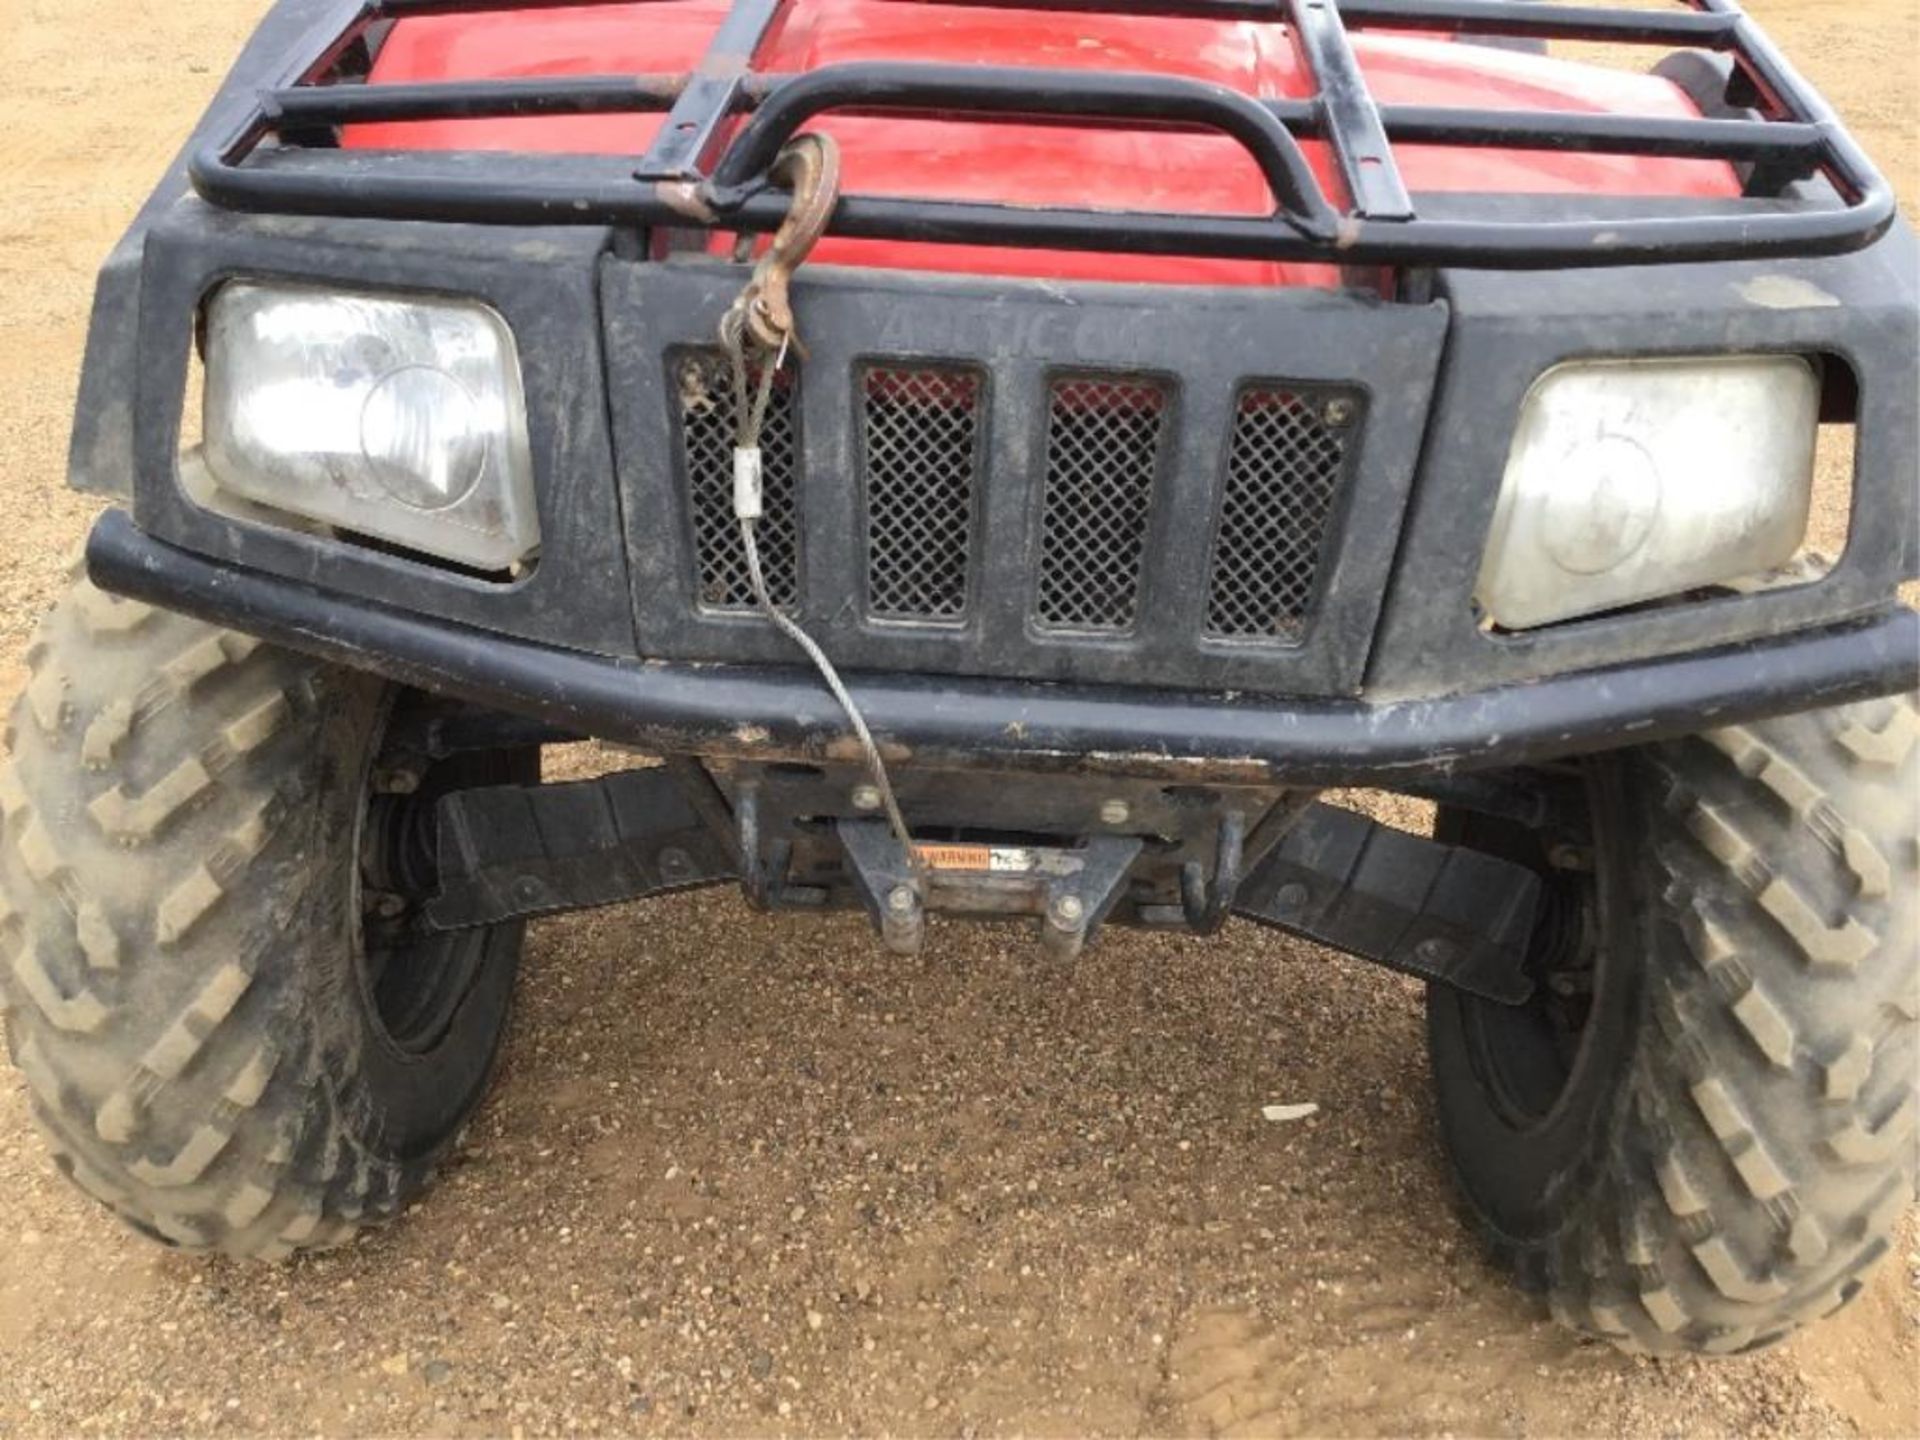 2004 Arctic 500i Automatic 4x4 Quad Winch. No VIN available - Image 13 of 13